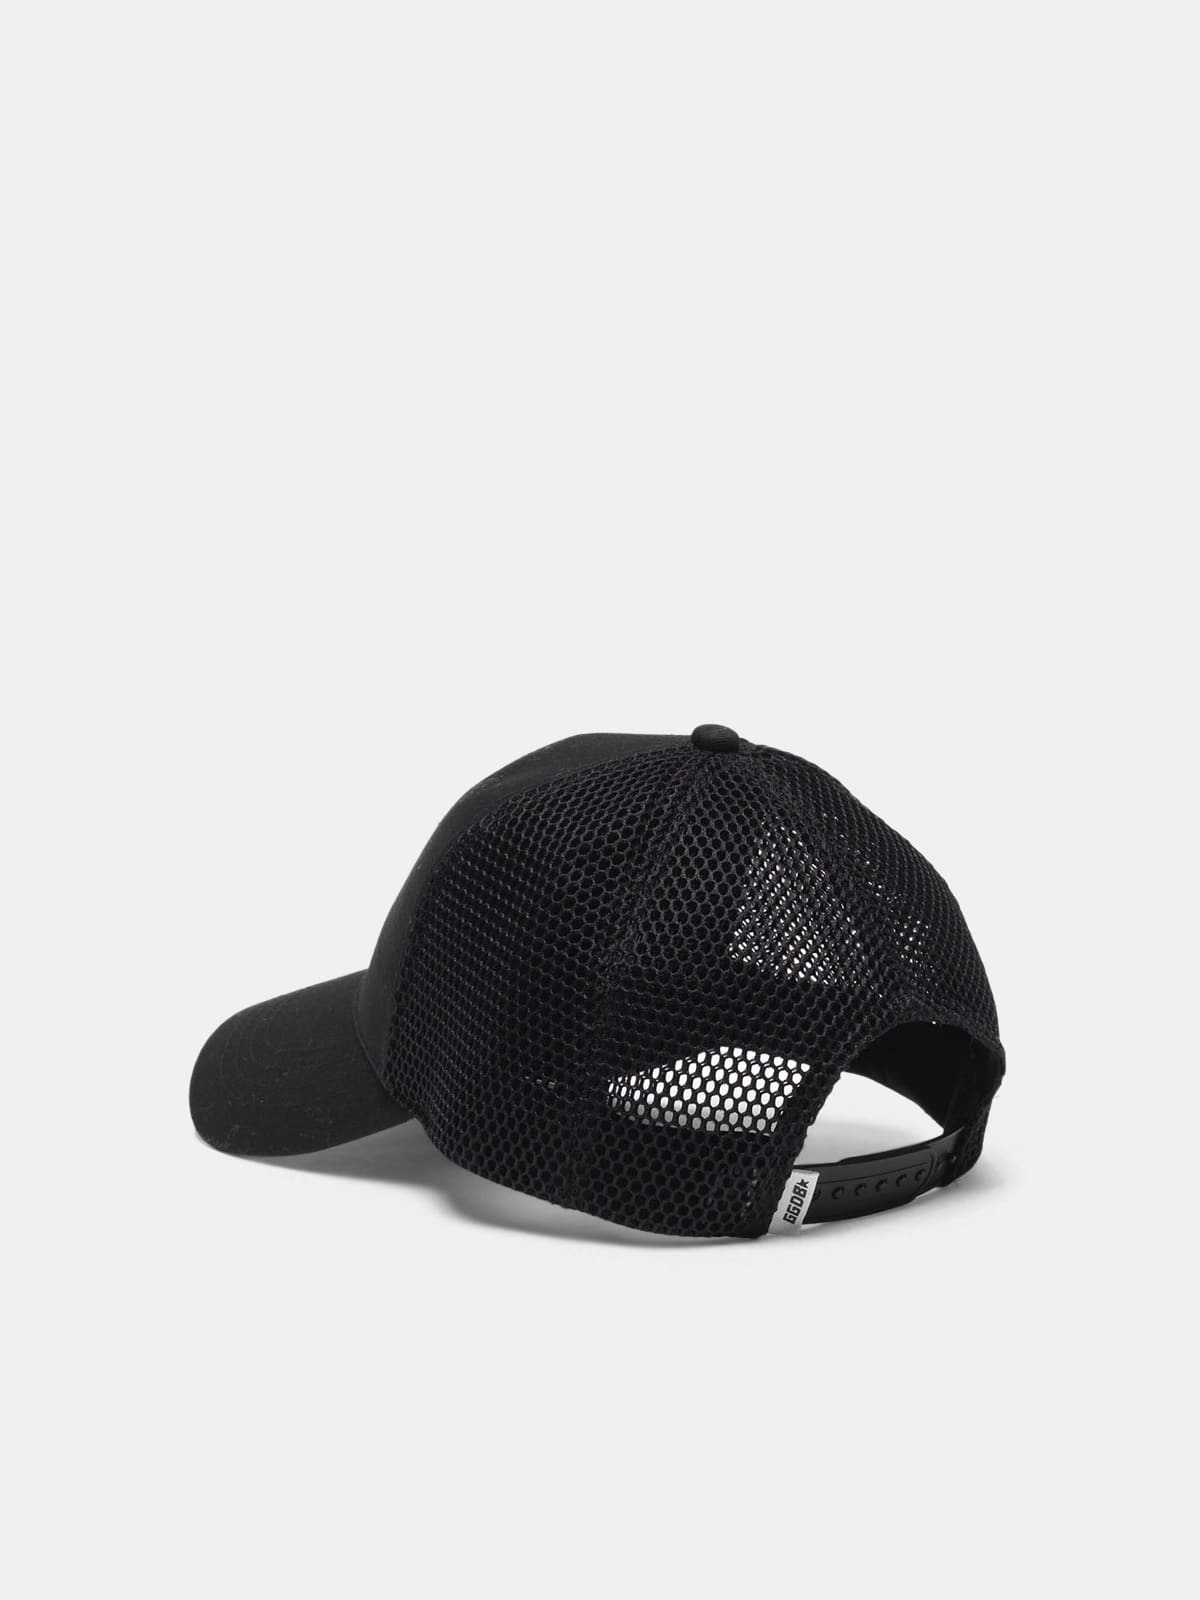 Aki baseball cap with GG embroidery and mesh back